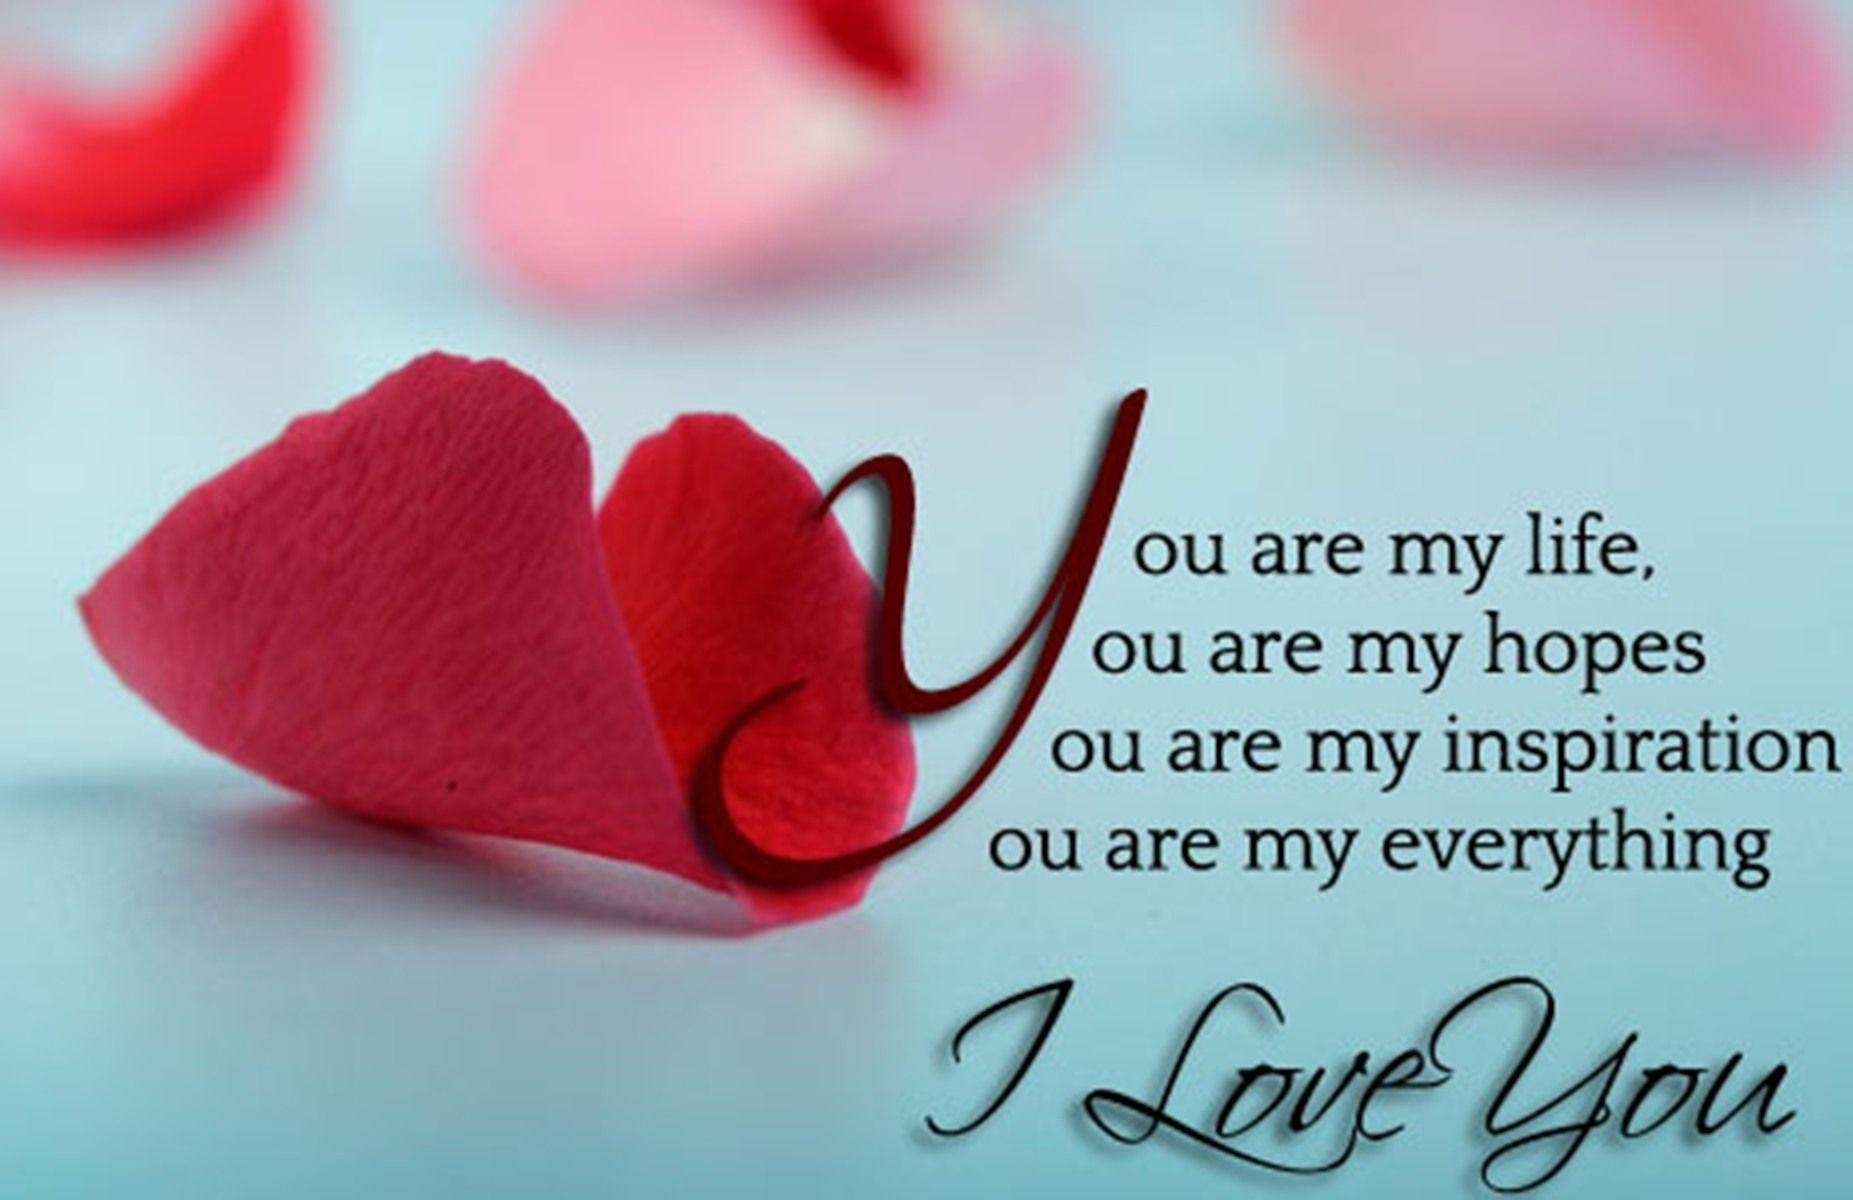 10 Best Love Wallpapers With Messages FULL HD 1920×1080 For PC Desktop